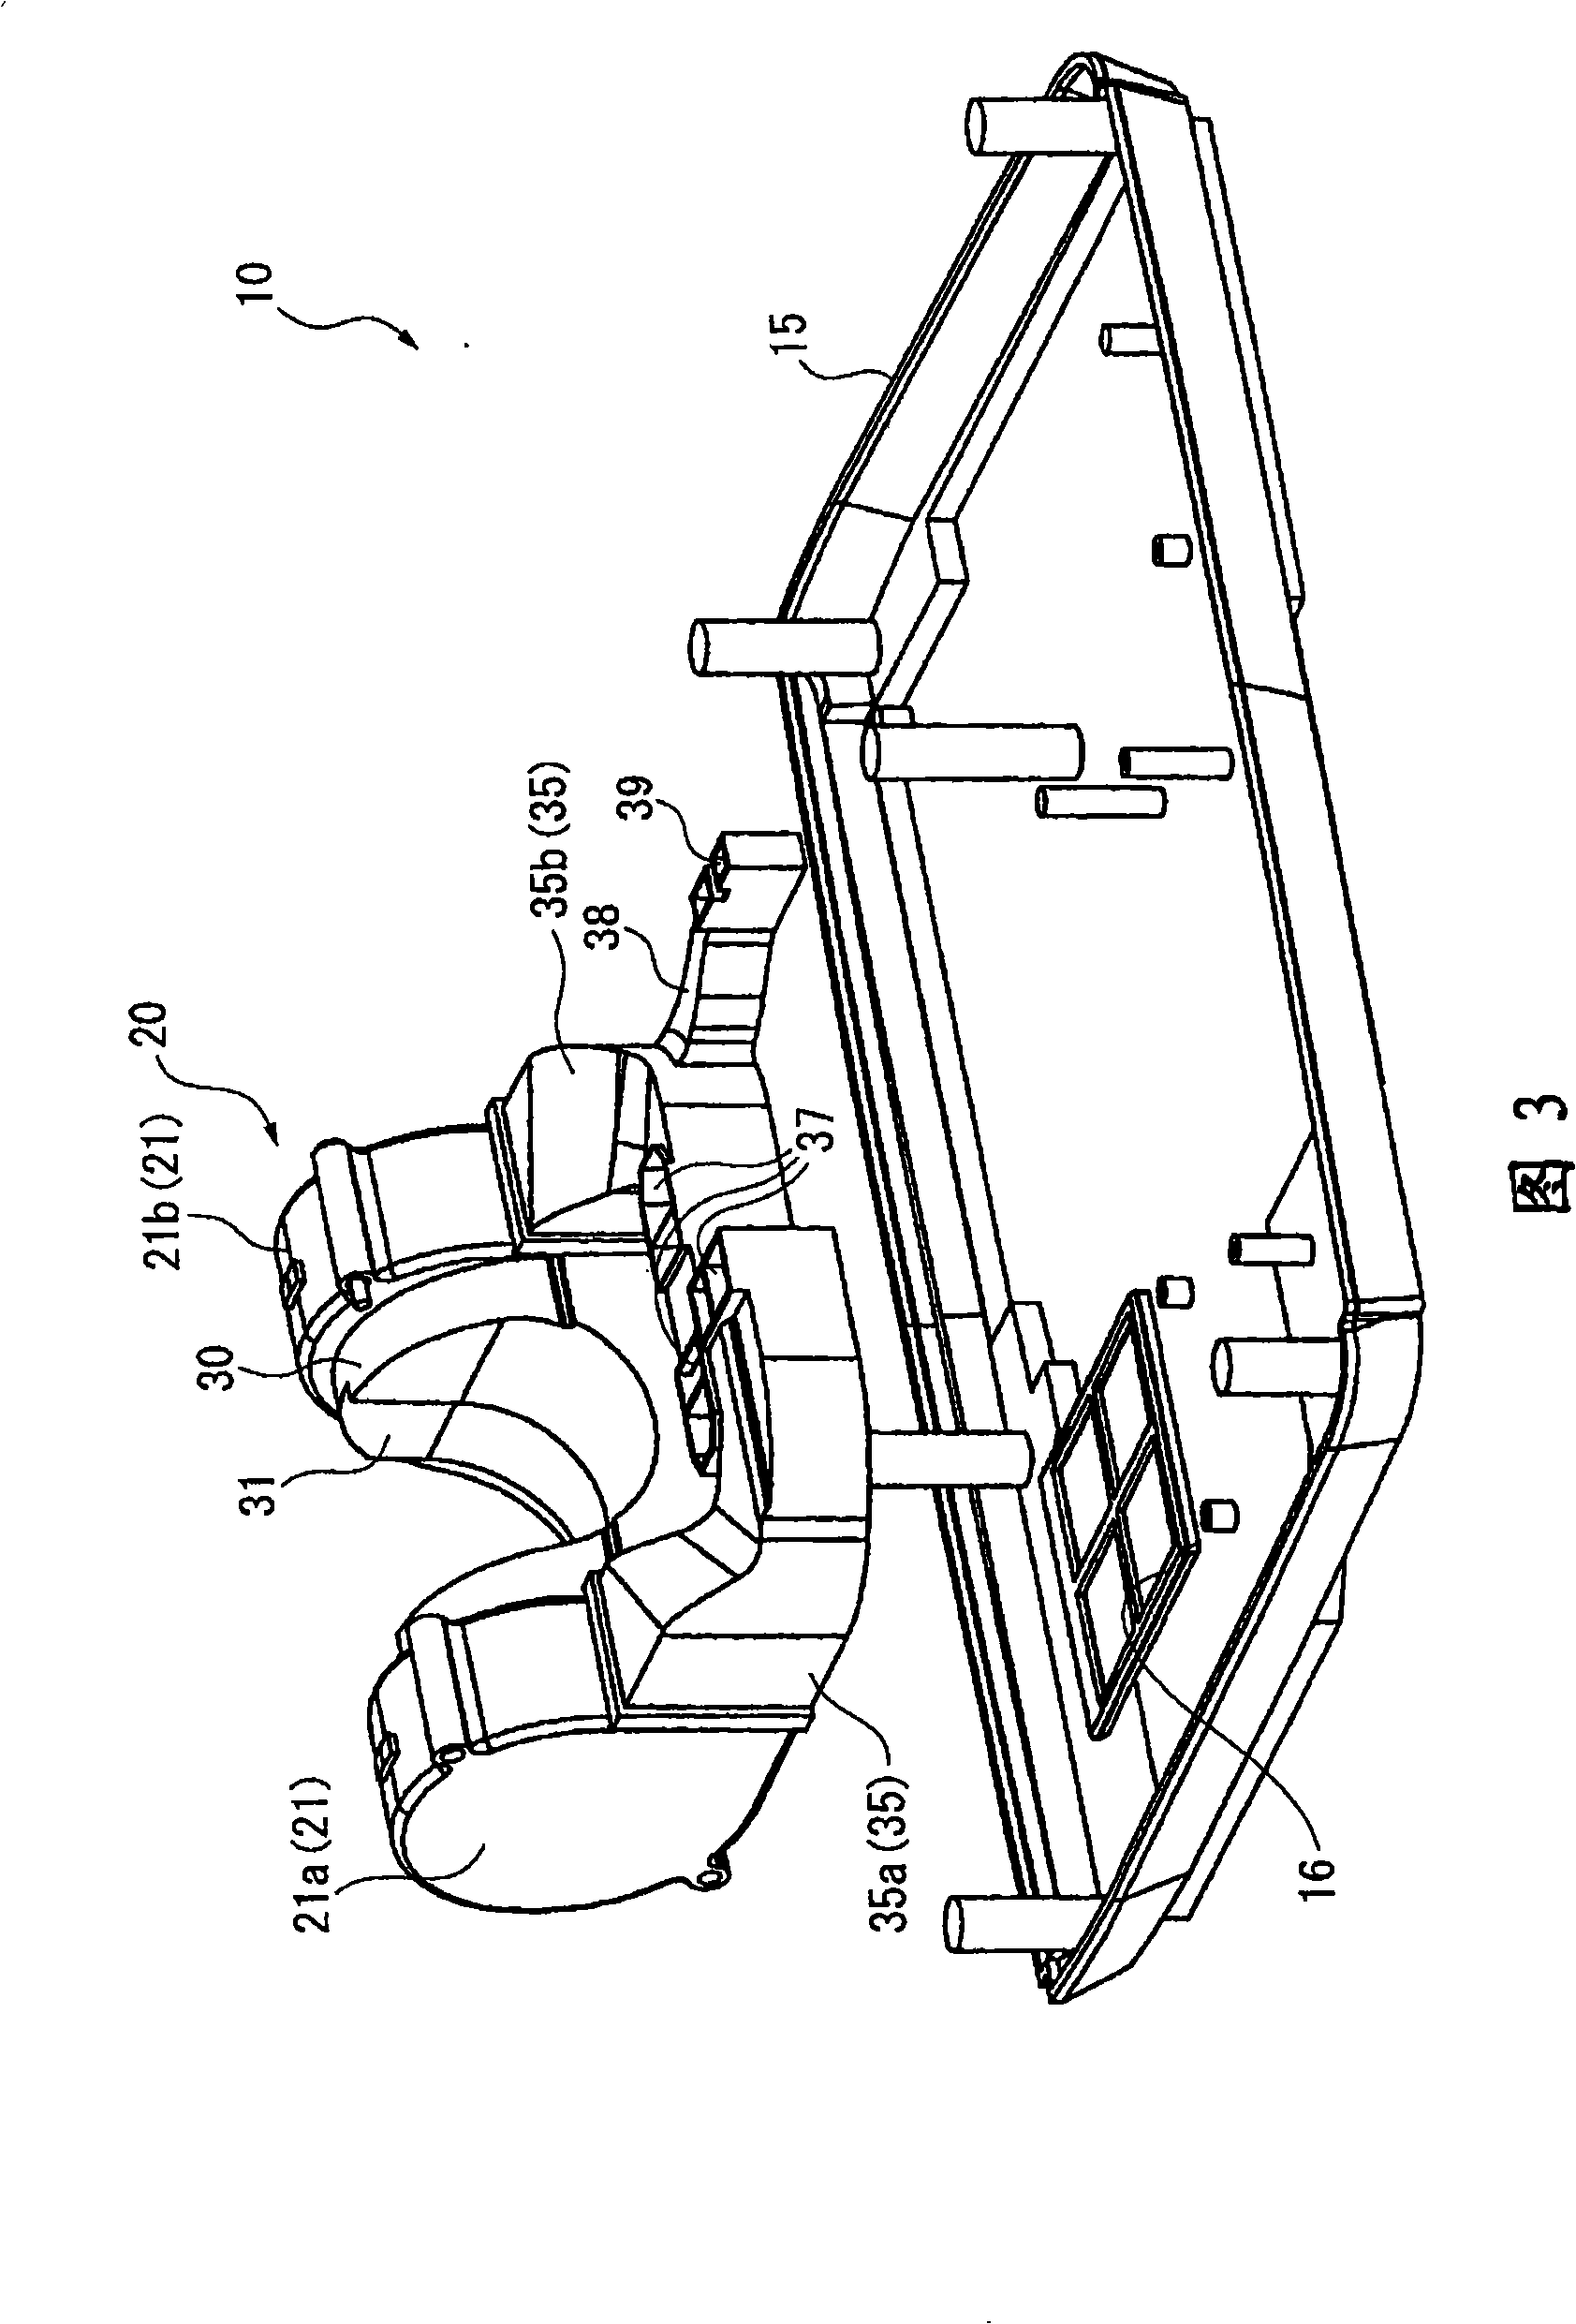 Production method of projector